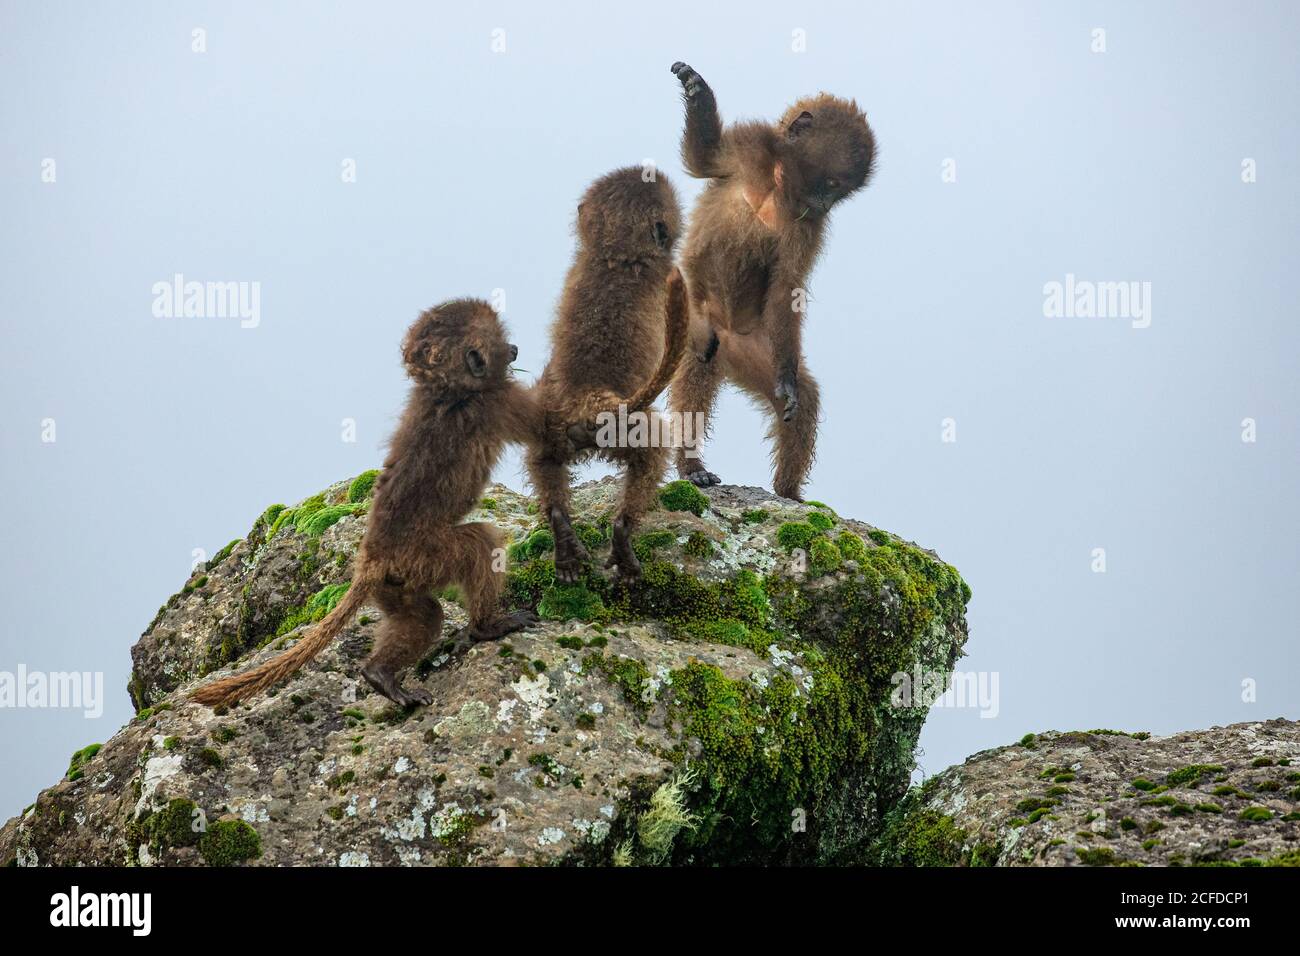 Group of baby baboons sitting on mossy rock and playing on cloudy day in Africa Stock Photo